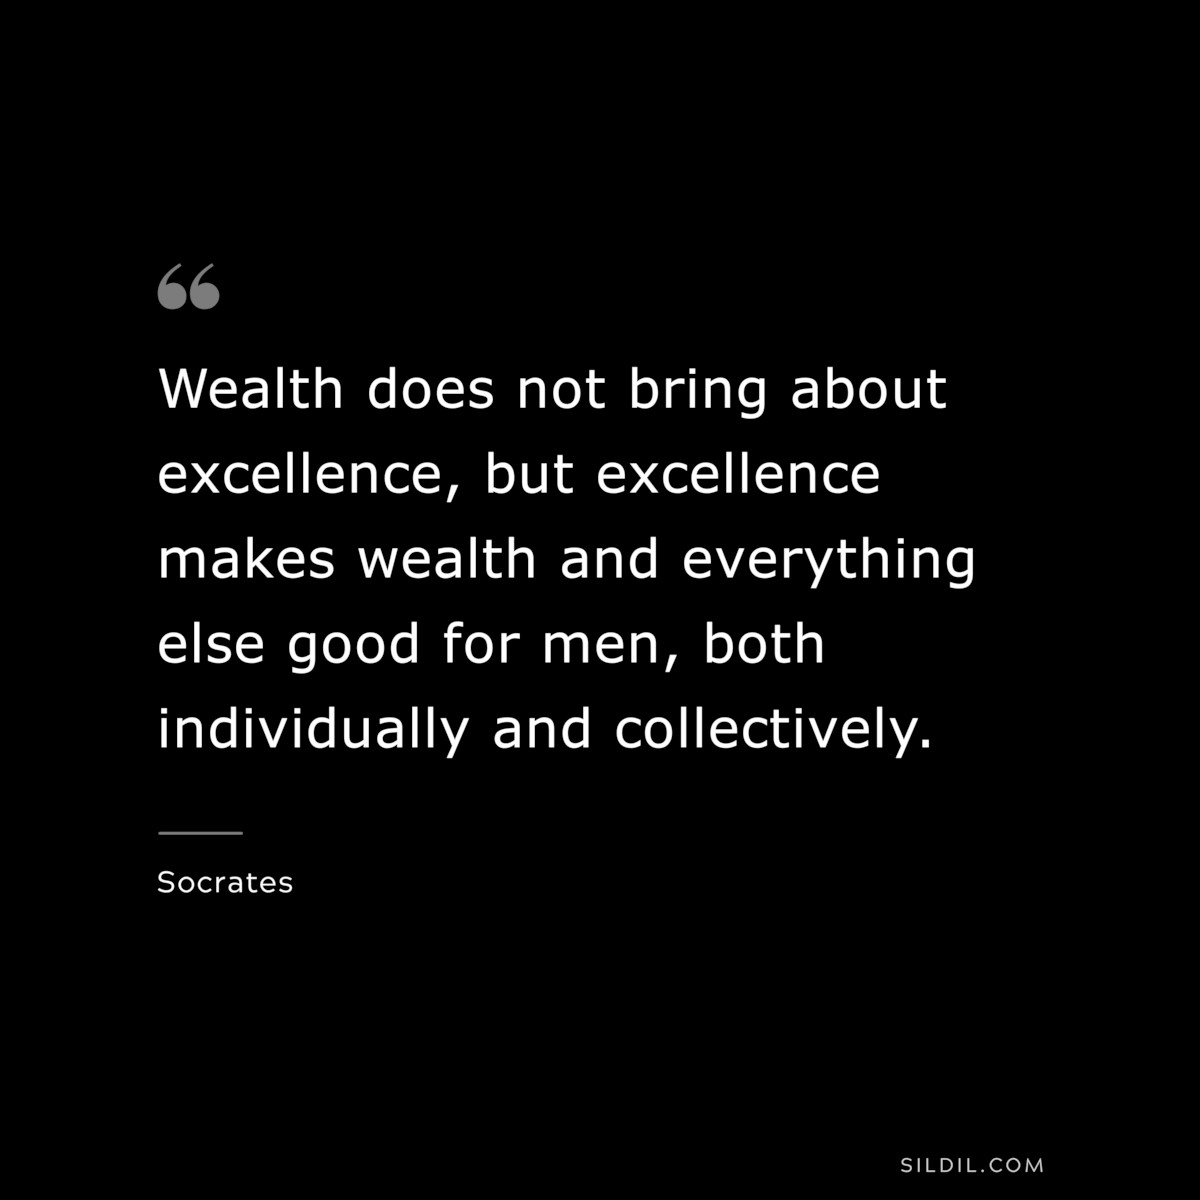 Wealth does not bring about excellence, but excellence makes wealth and everything else good for men, both individually and collectively. ― Socrates